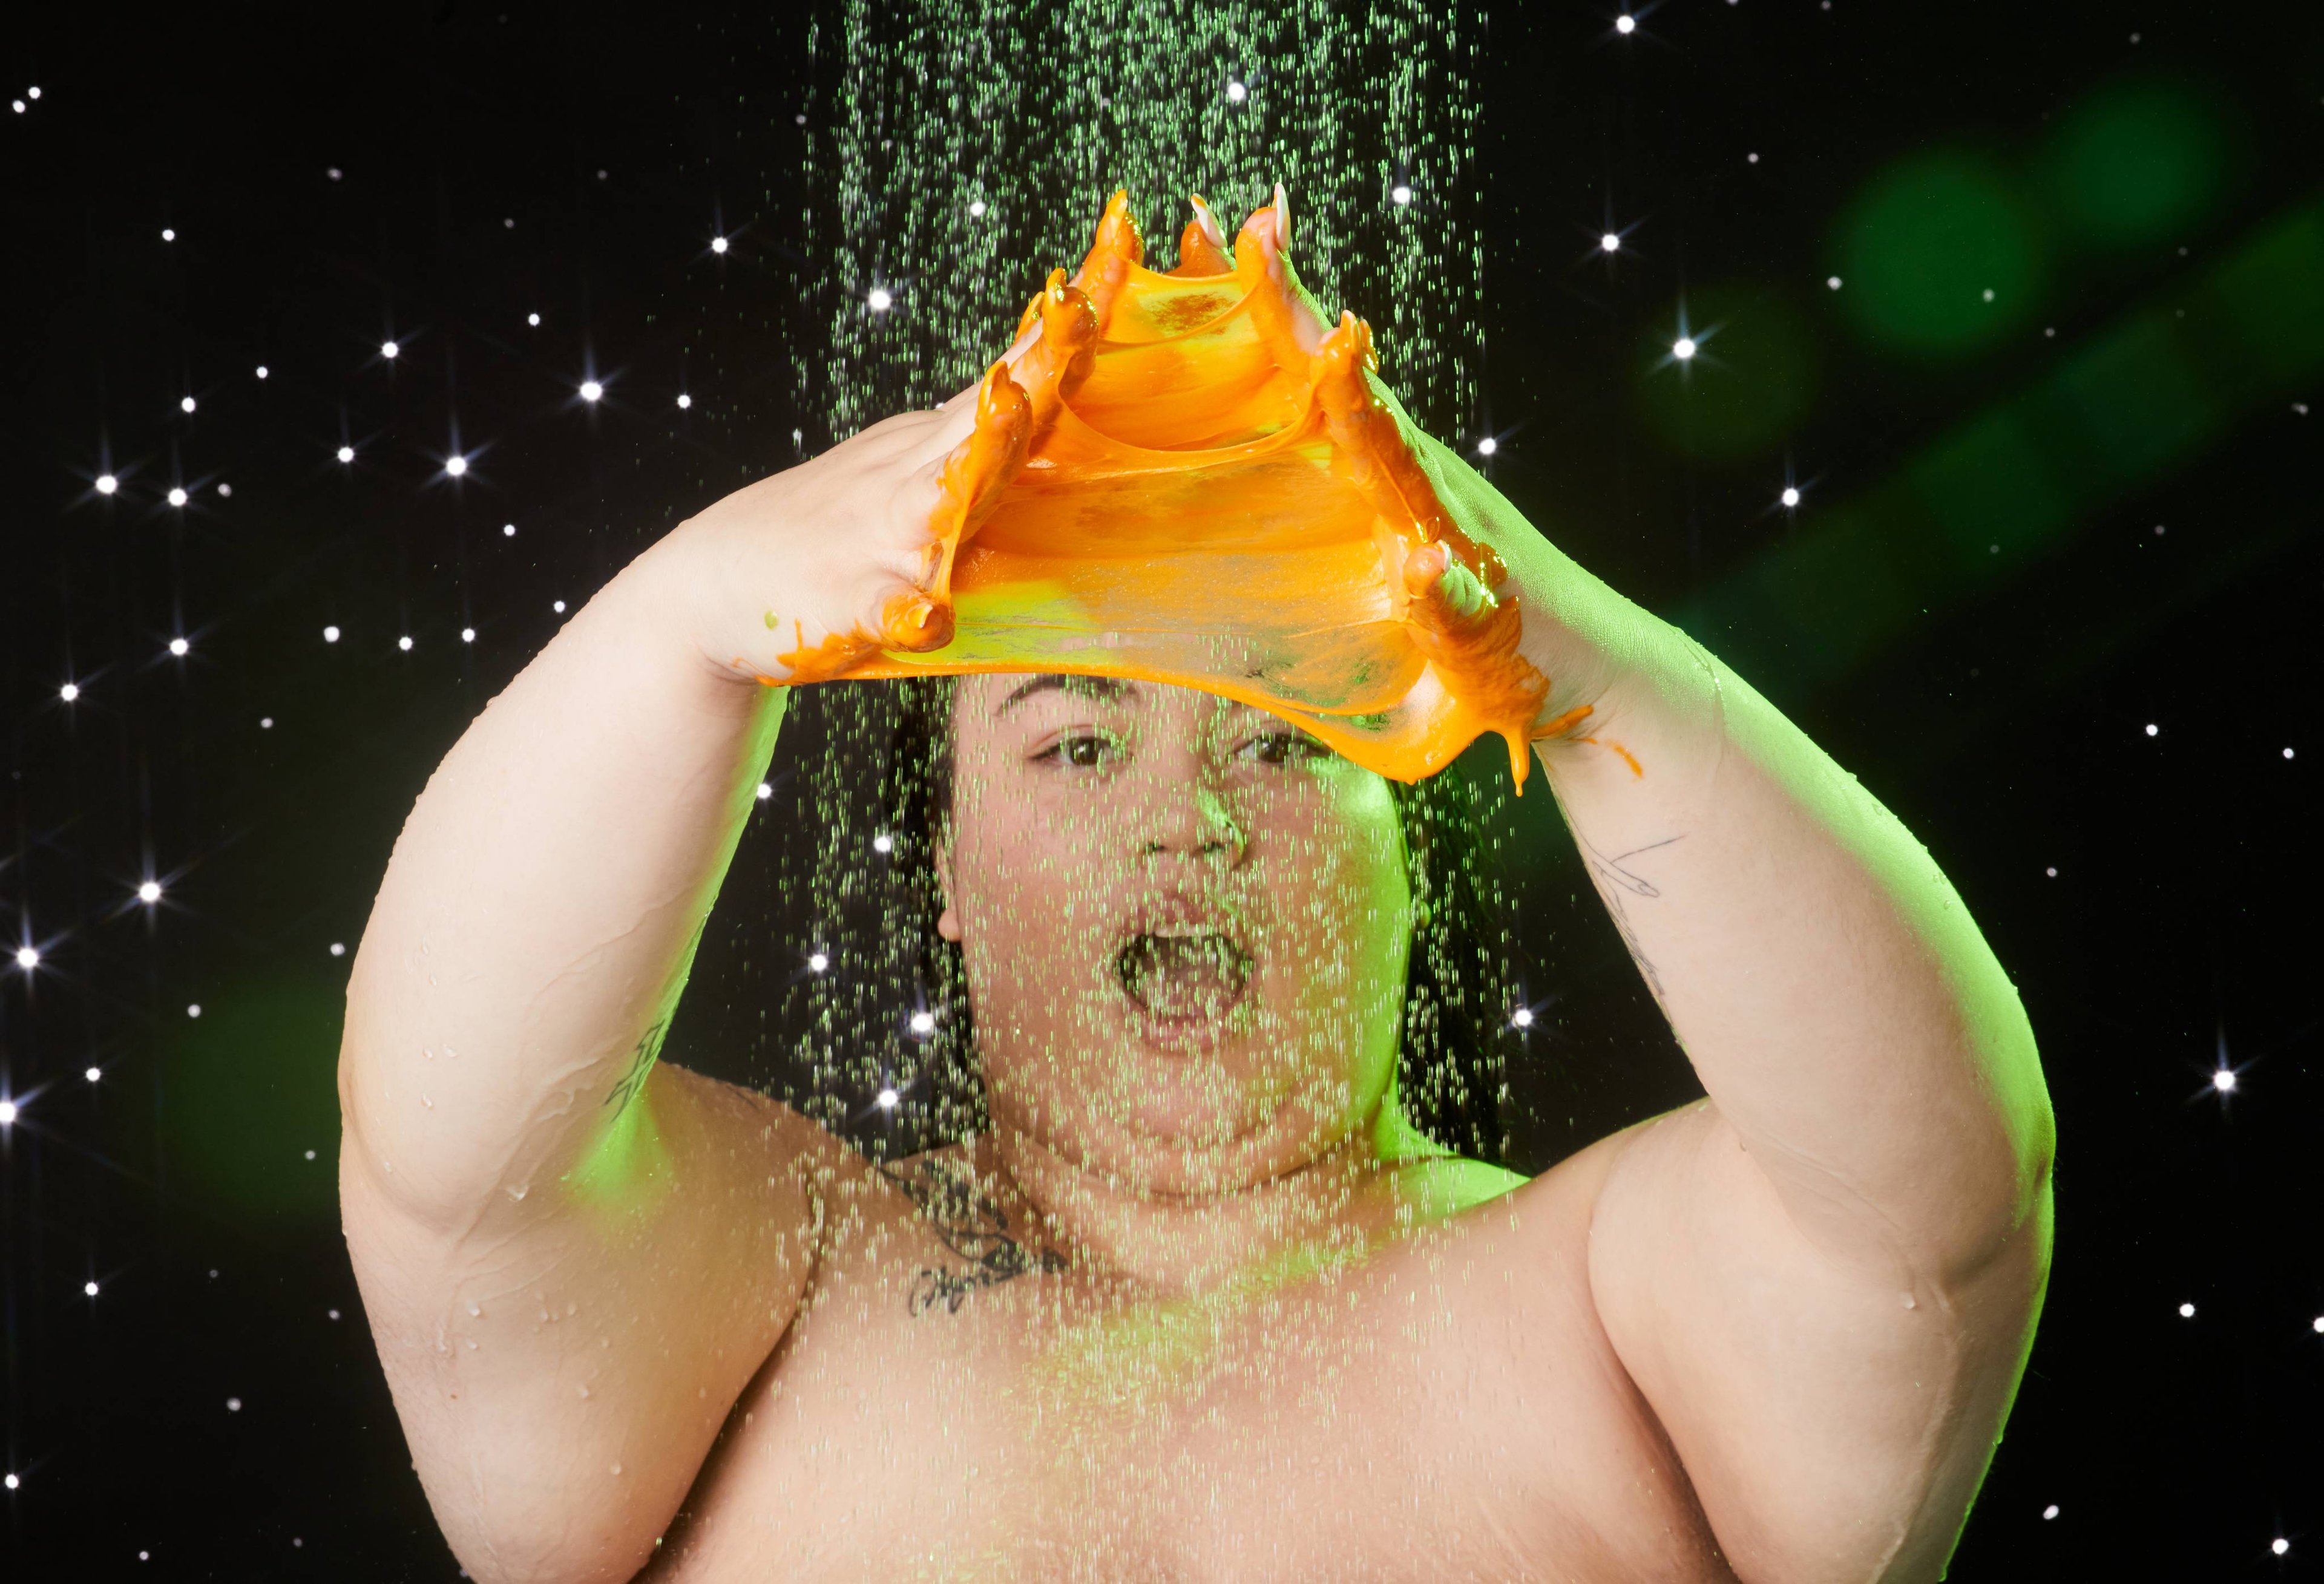 Model stands under the shower with both hands in front of them stretching the product creating a fun, orange, slimy webbing.